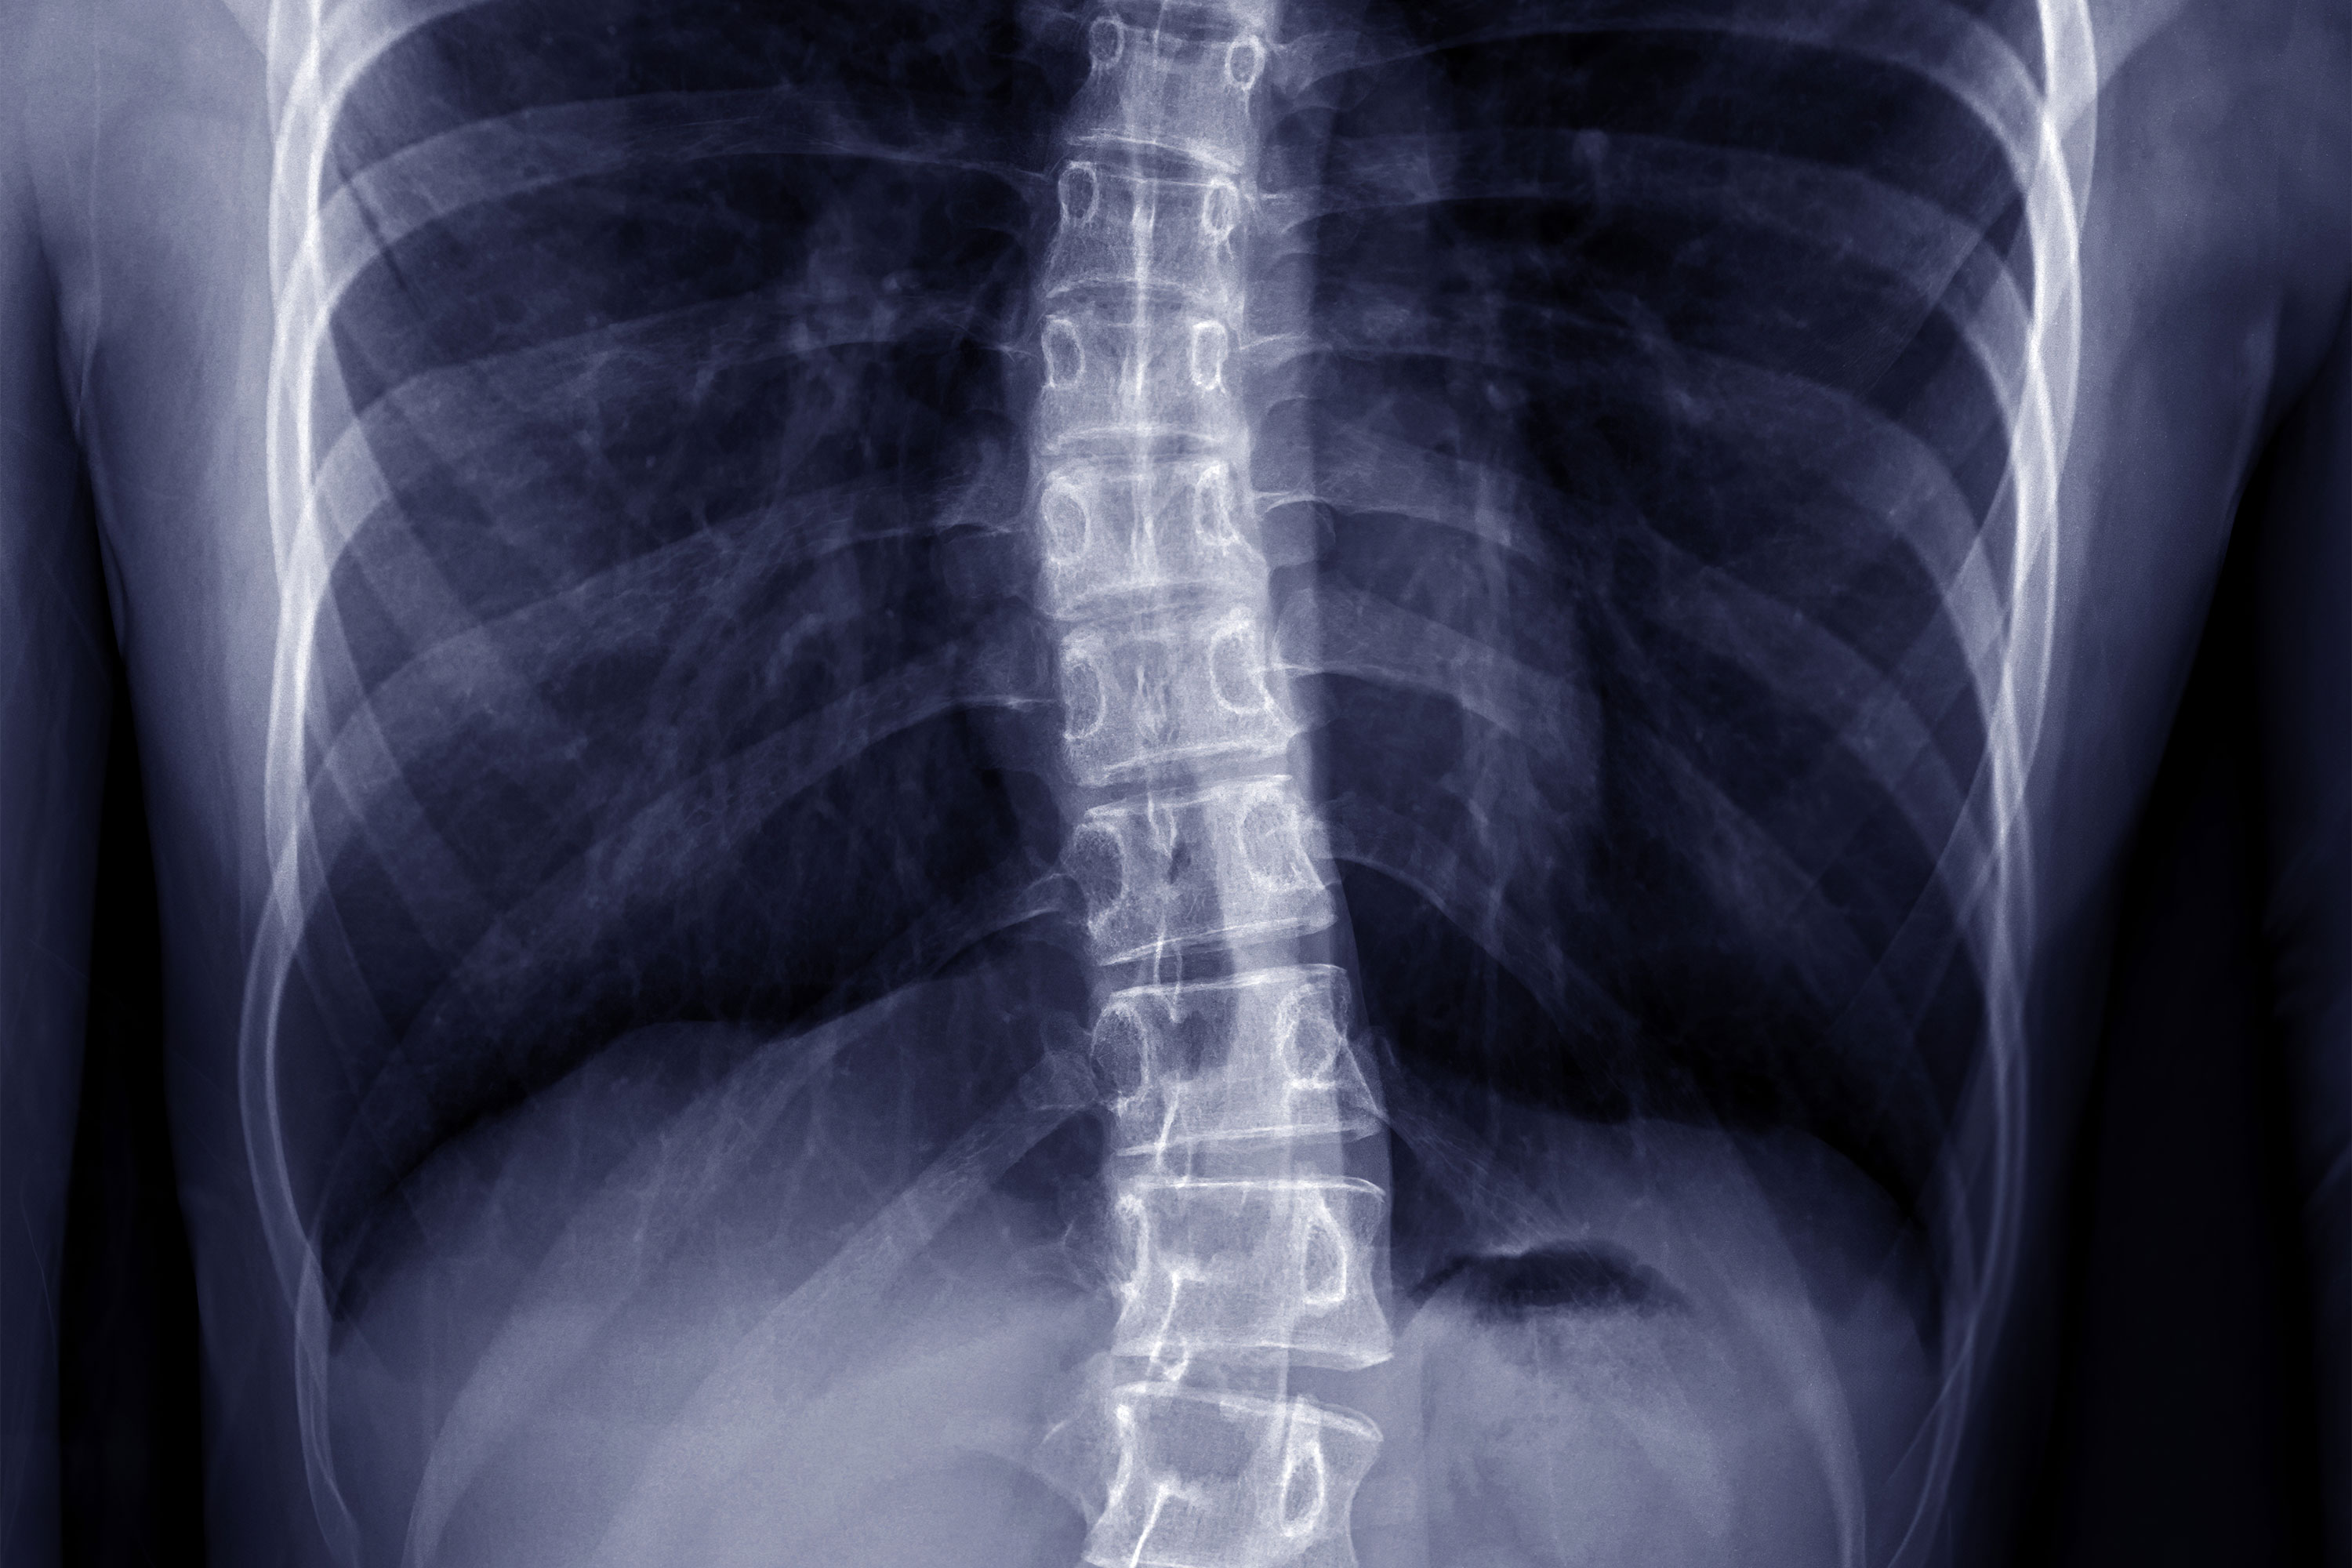 All About 'S'-Shaped Scoliosis